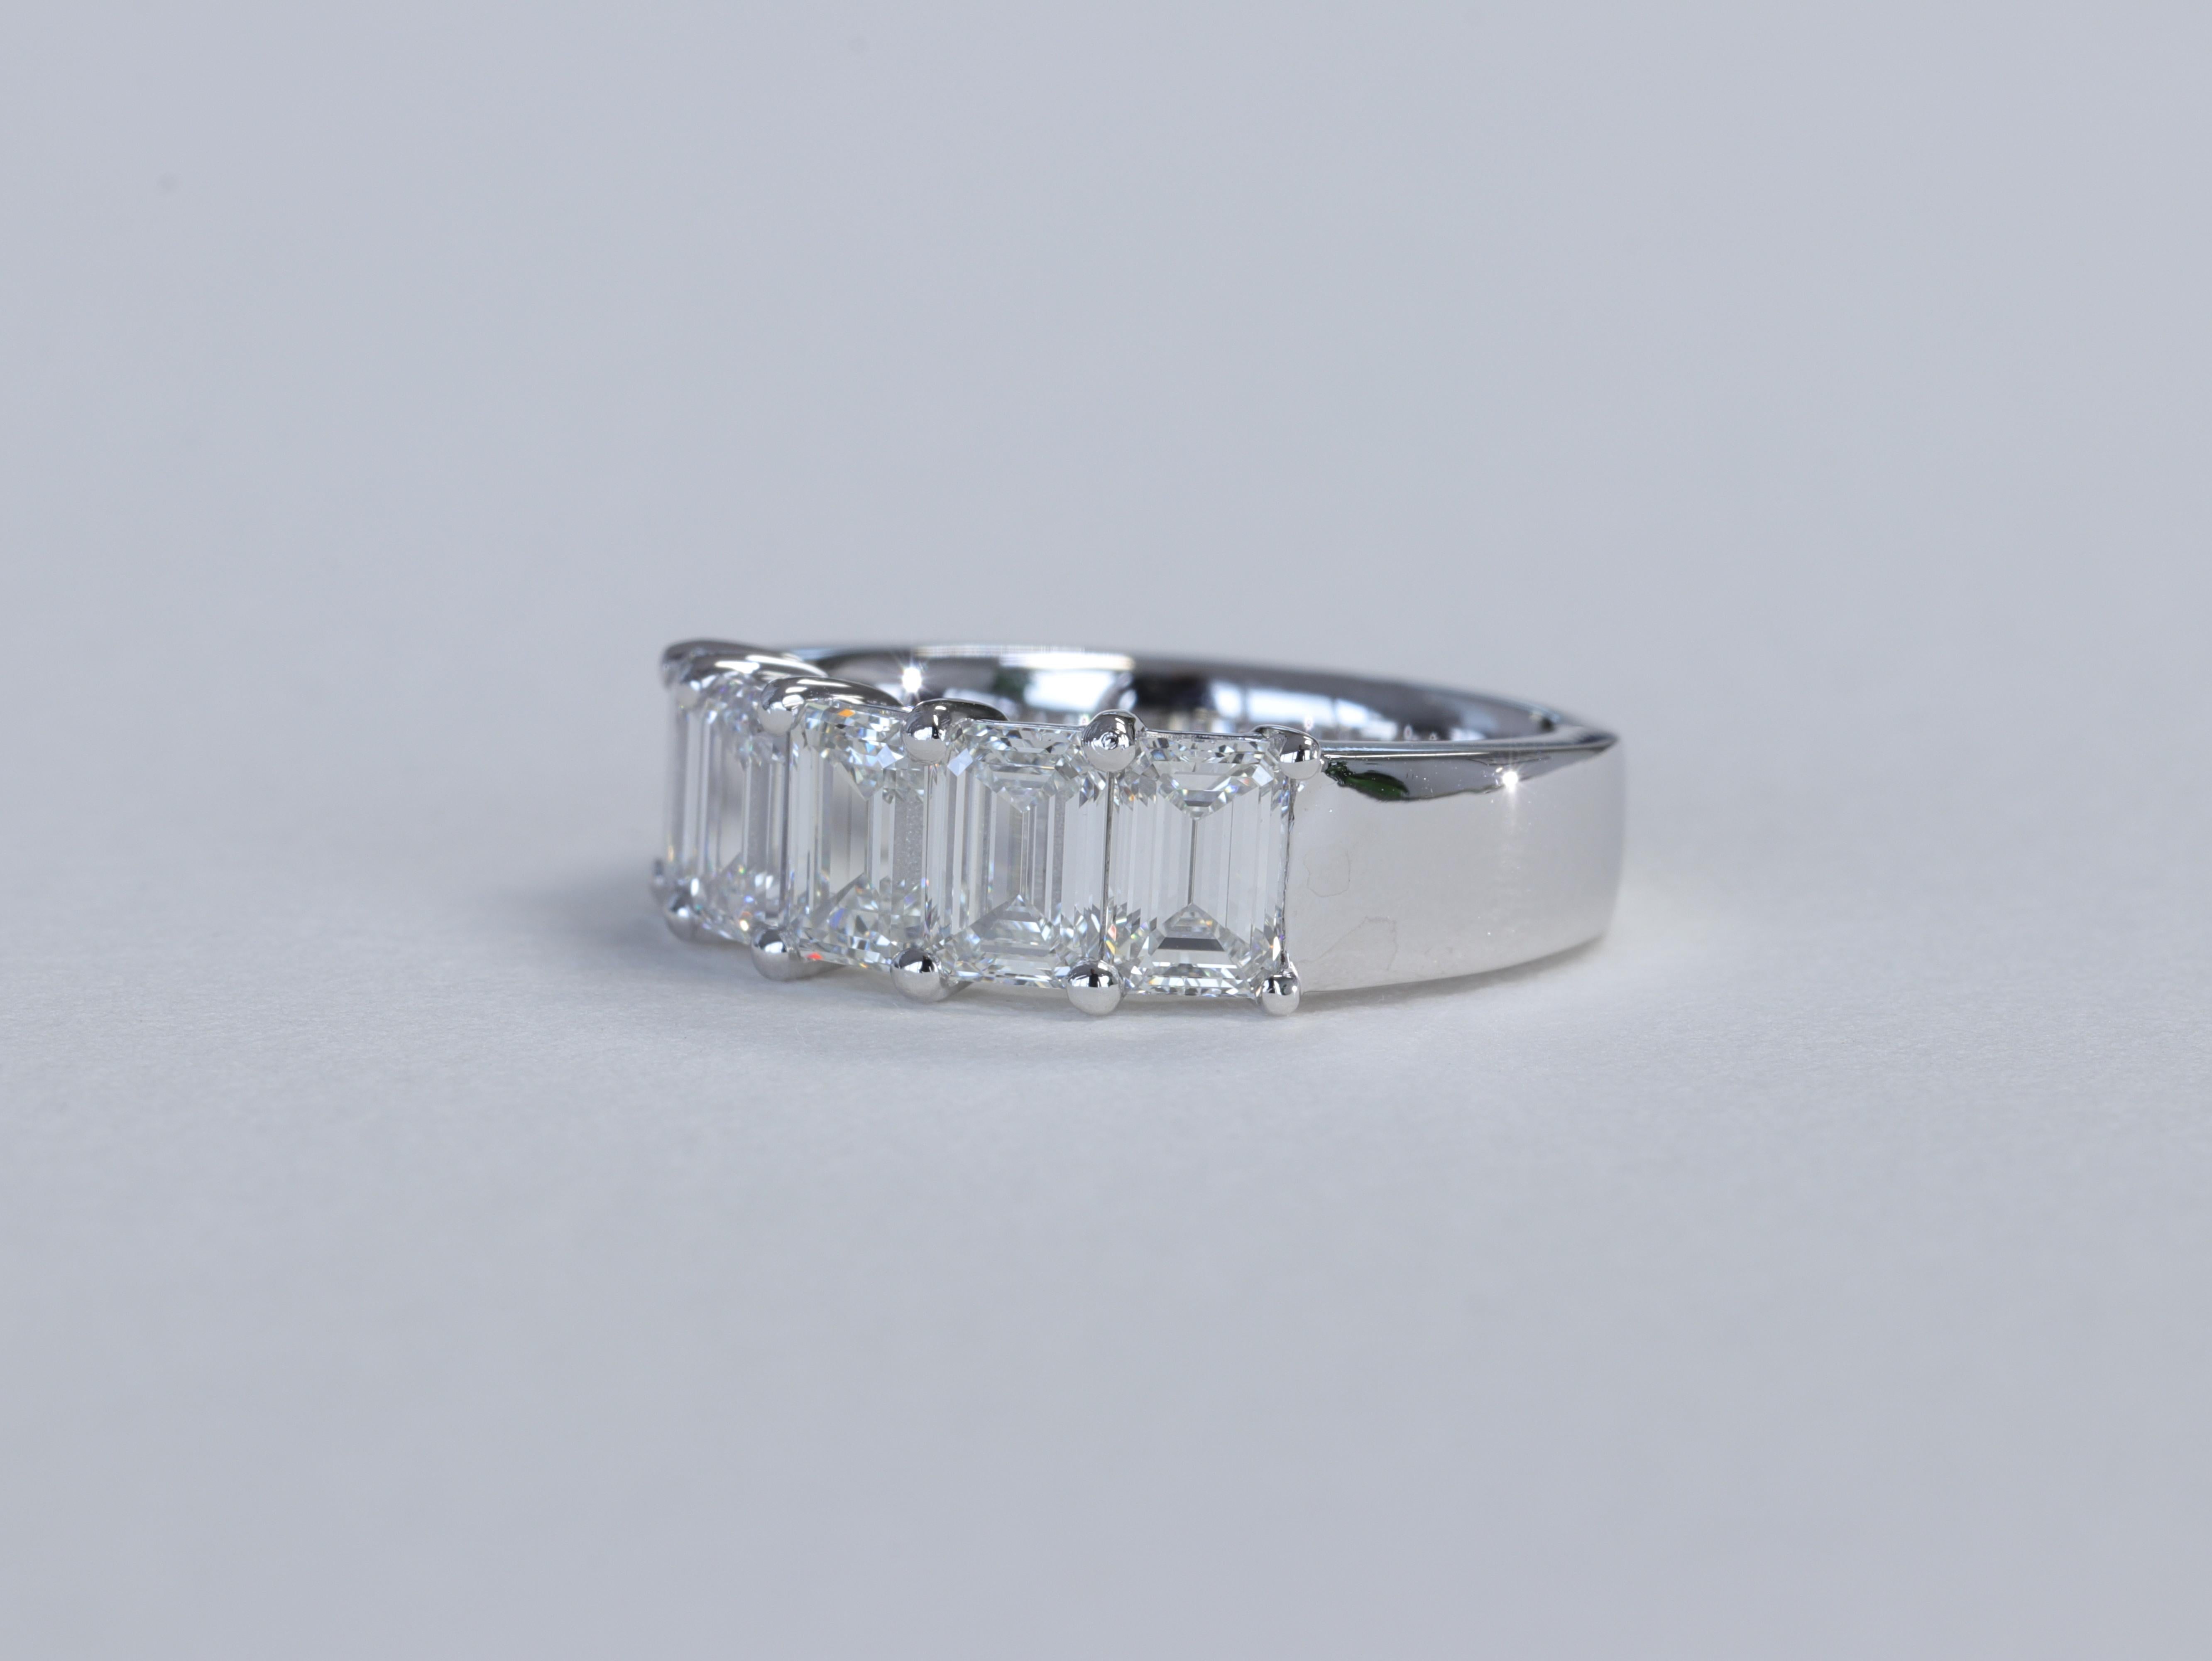 Emerald Cut Diamond and Platinum 5 Stone Anniversary Wedding Band Ring GIA In New Condition For Sale In Tampa, FL